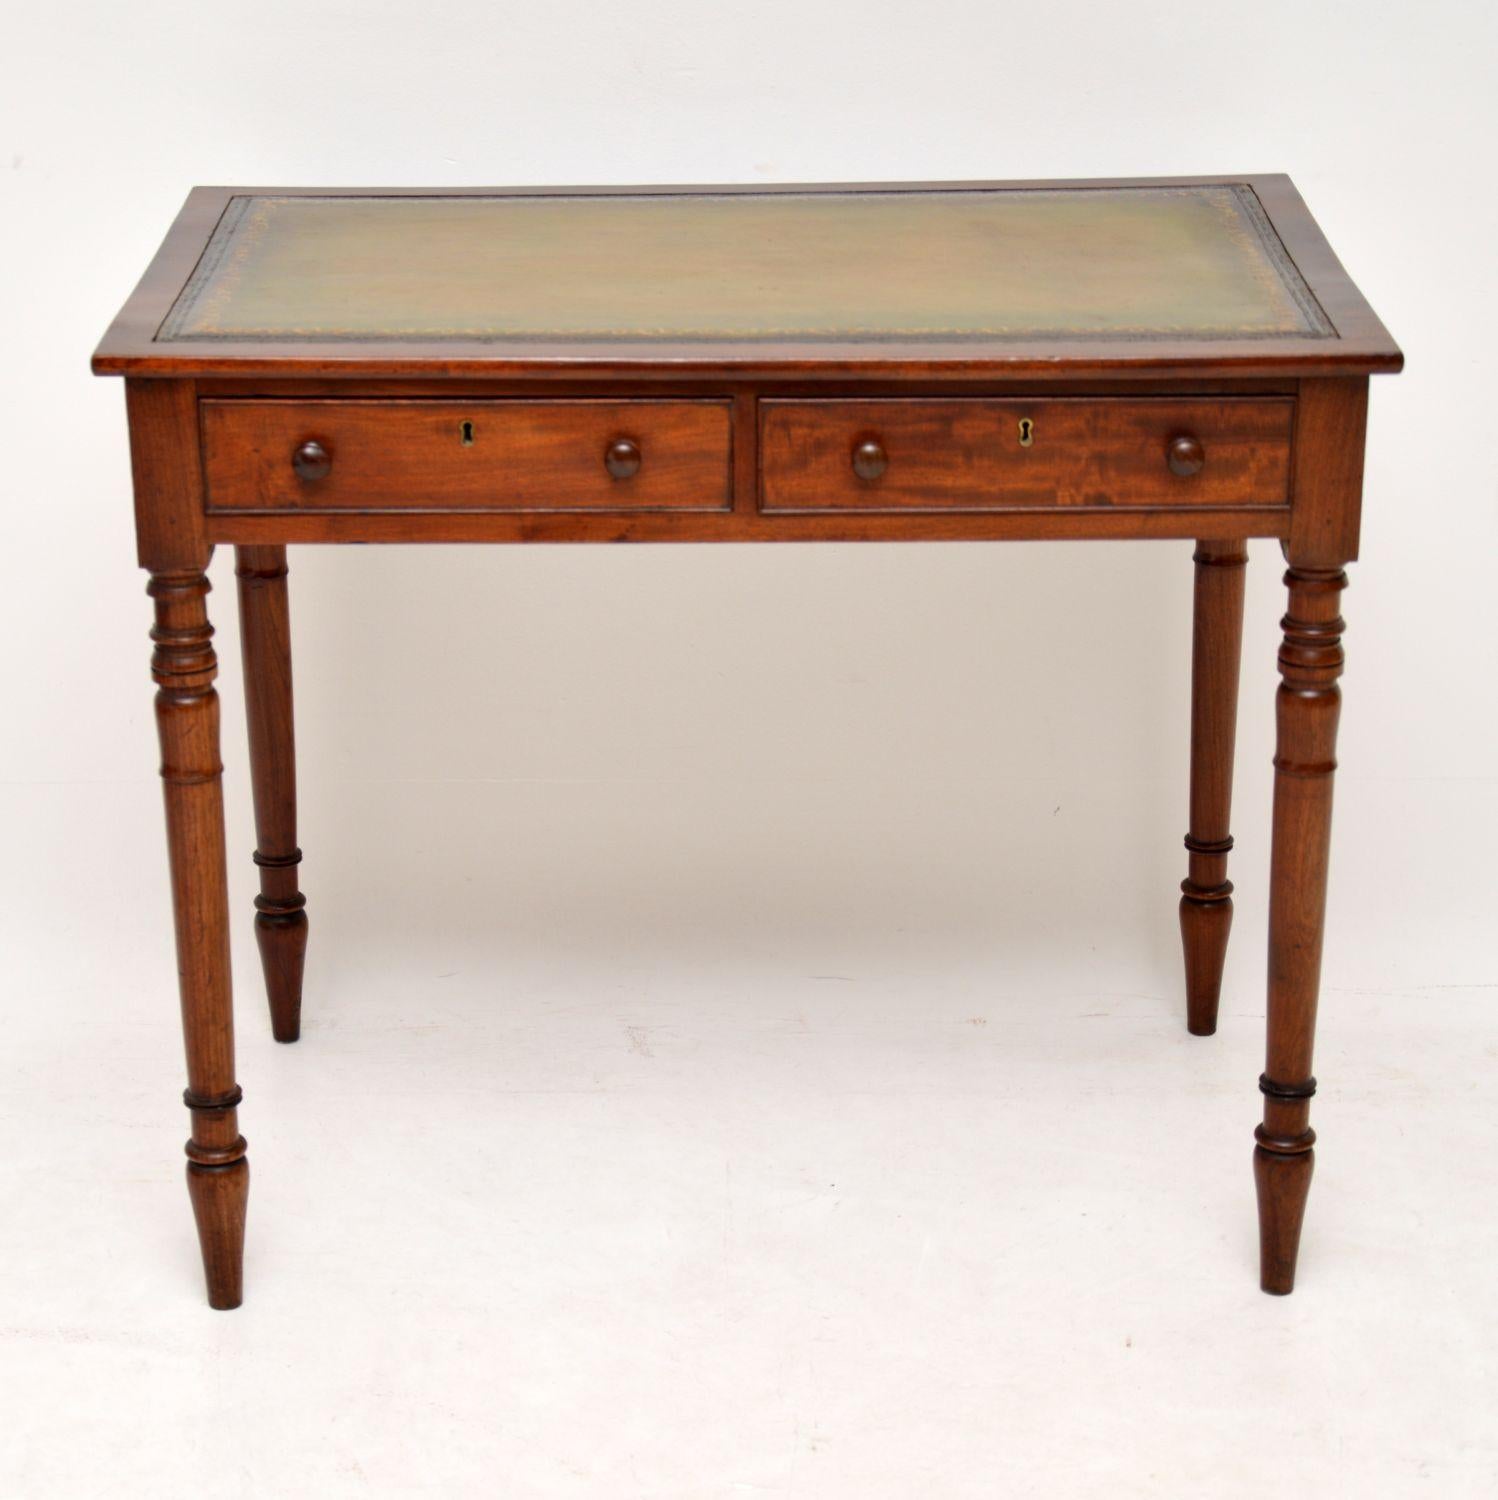 This is a very neat small antique writing table from circa 1800s-1820s period & what’s particularly nice about it is that it’s two sided, with dummy drawers on the back. It’s mahogany with a tooled leather writing surface & two drawers on the front